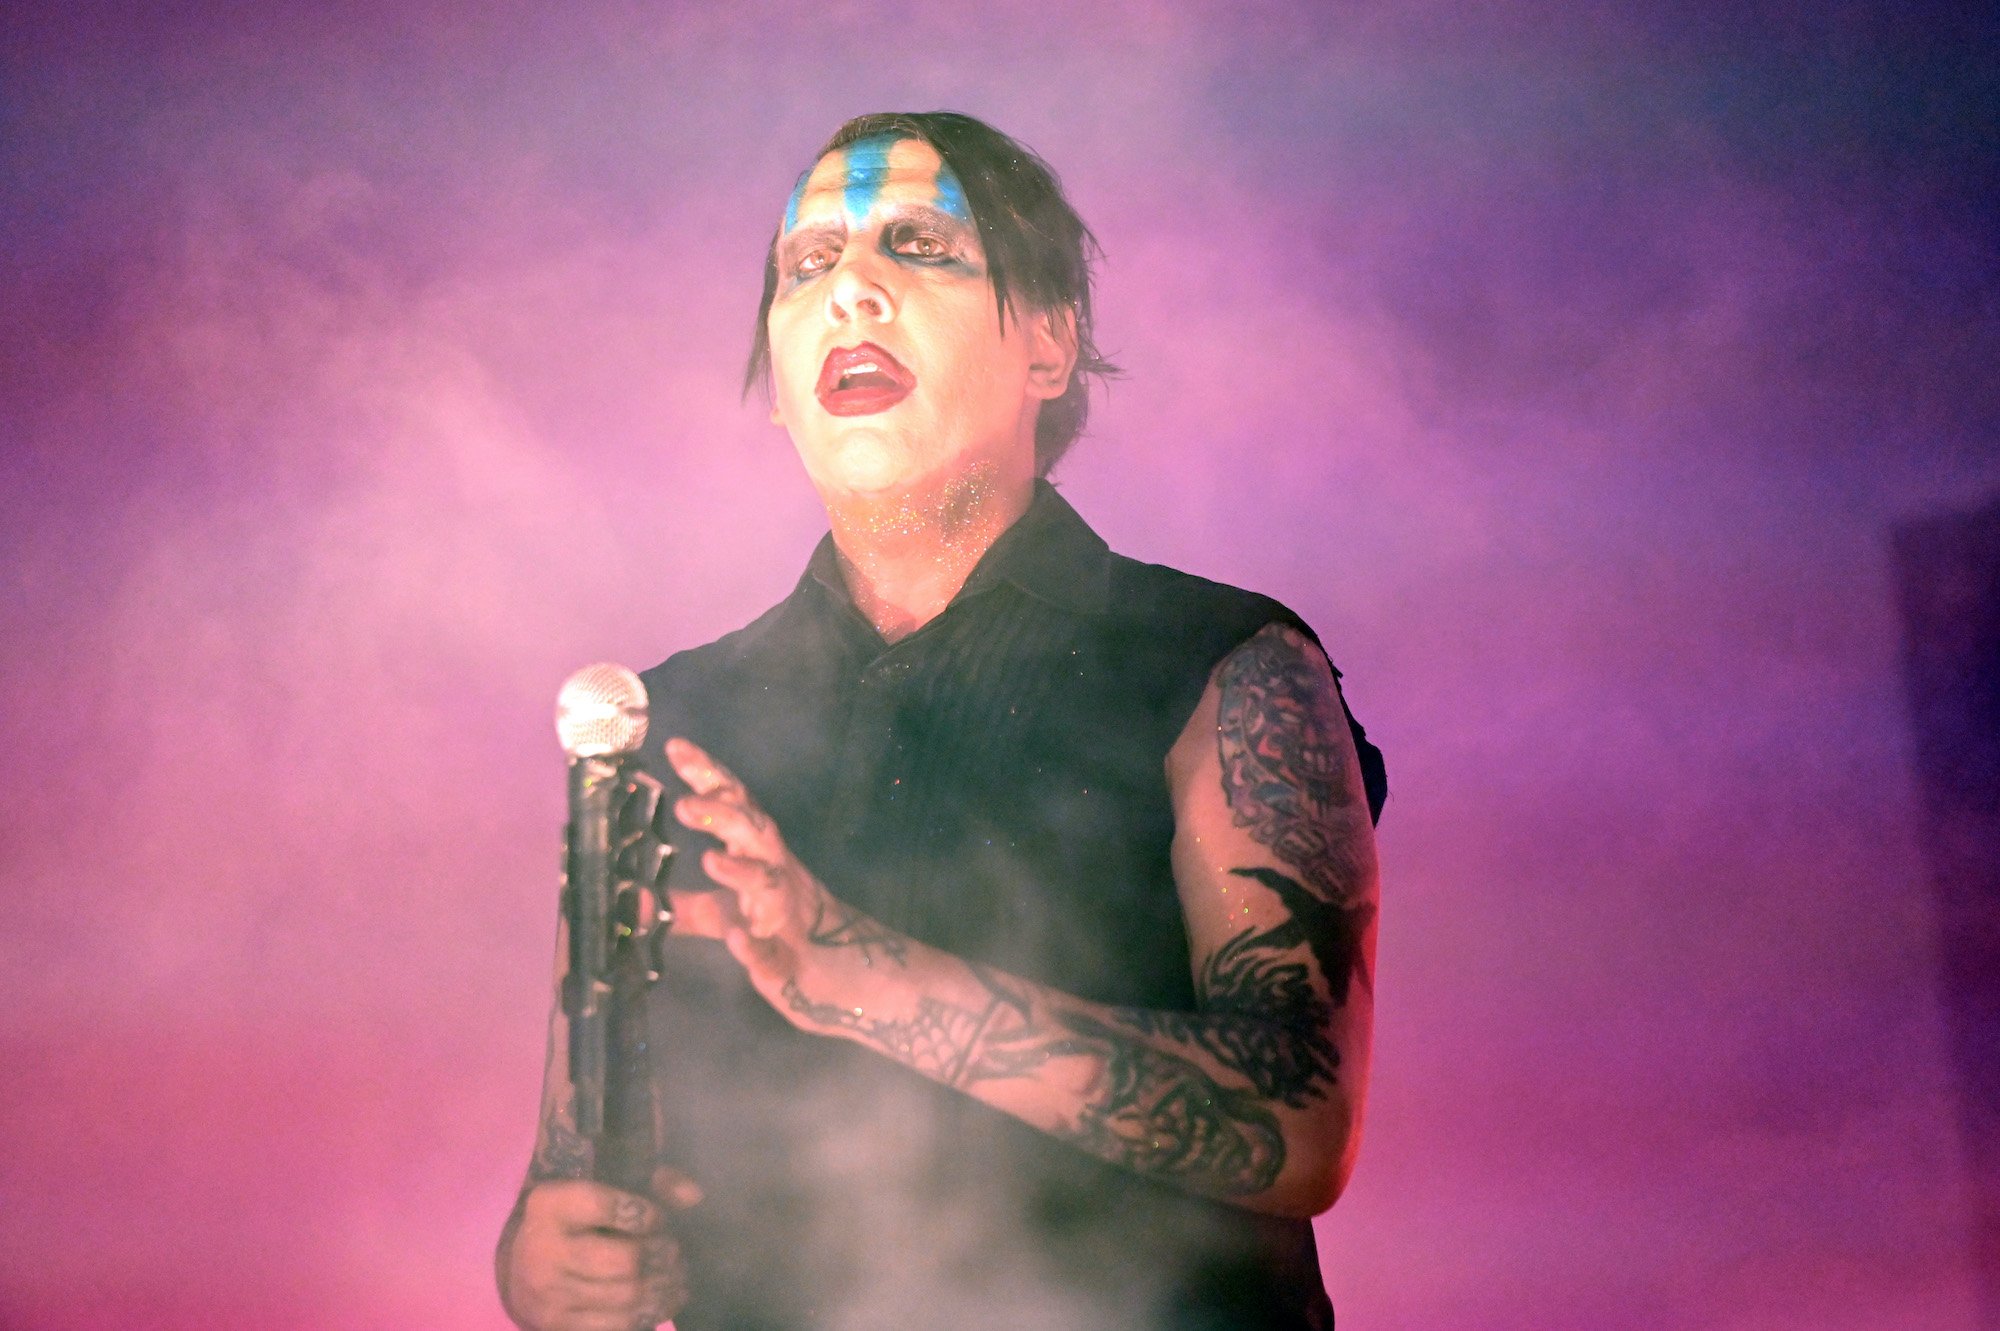 What Song Made Marilyn Manson Famous?